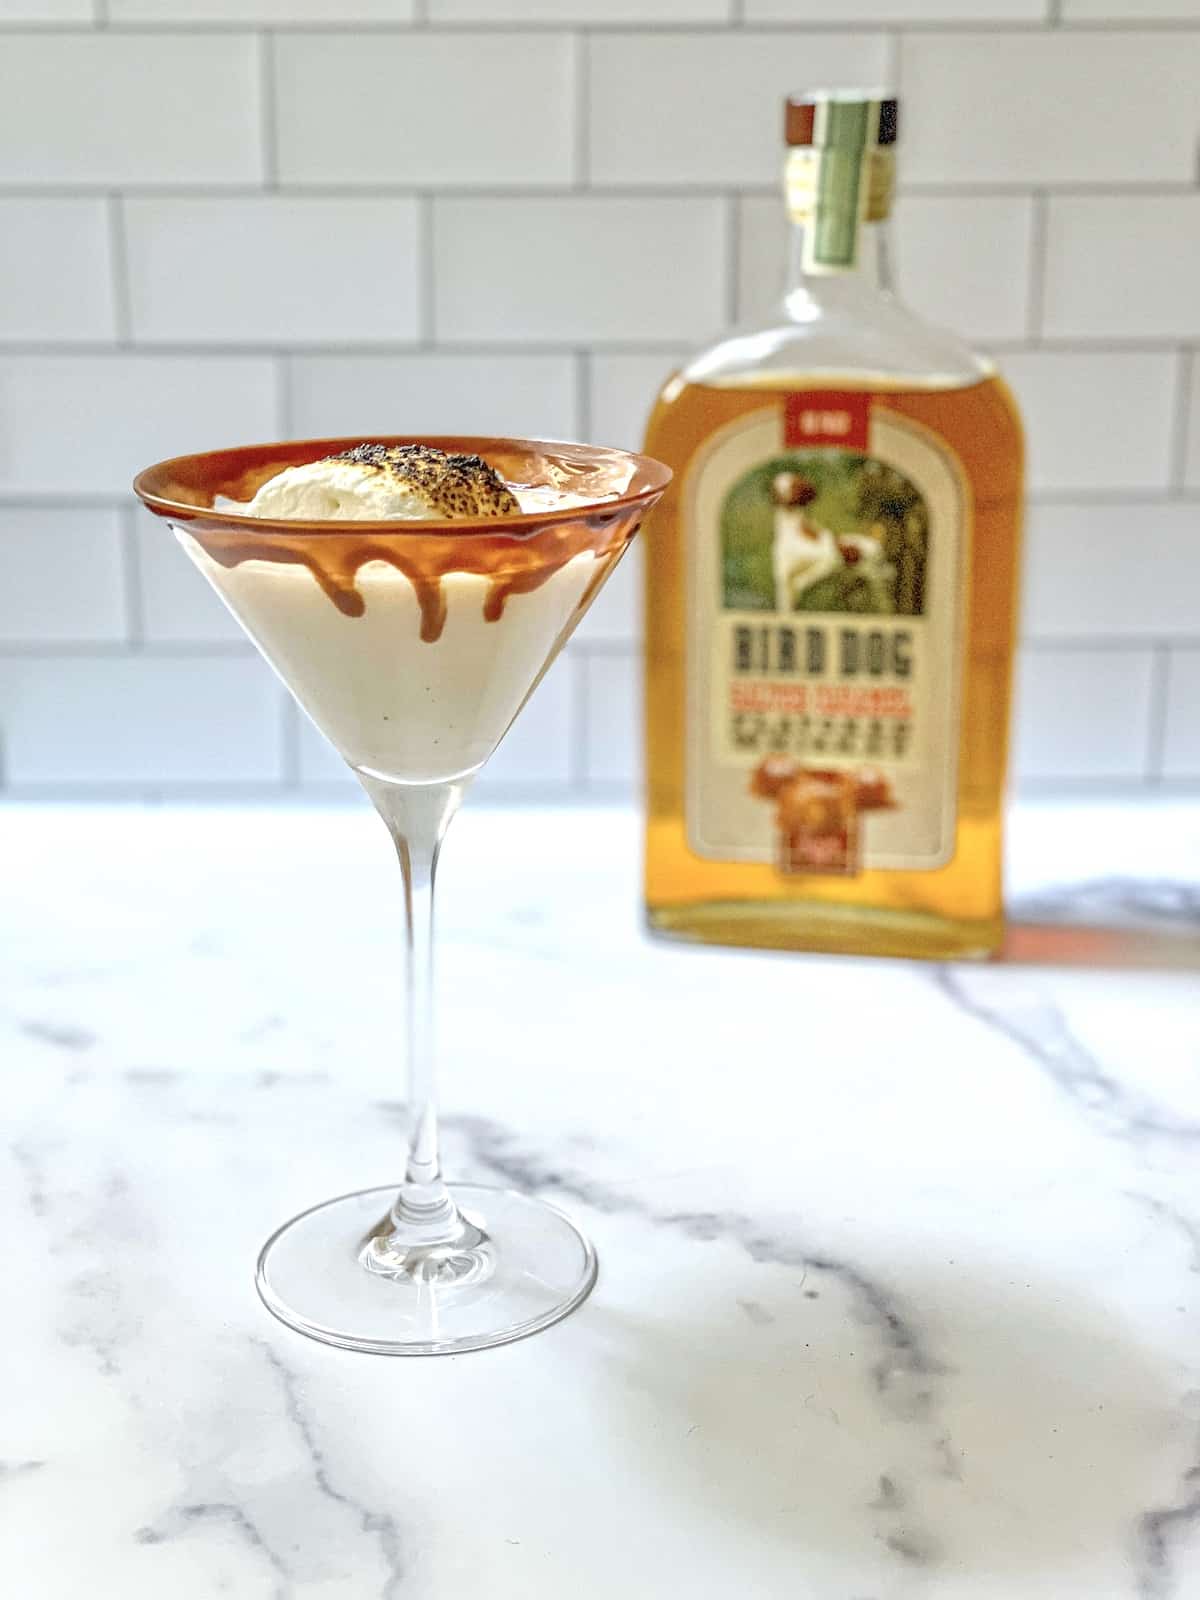 Bird Dog Whiskey bottle with cocktail in a martini glass topped with a marshmallow.